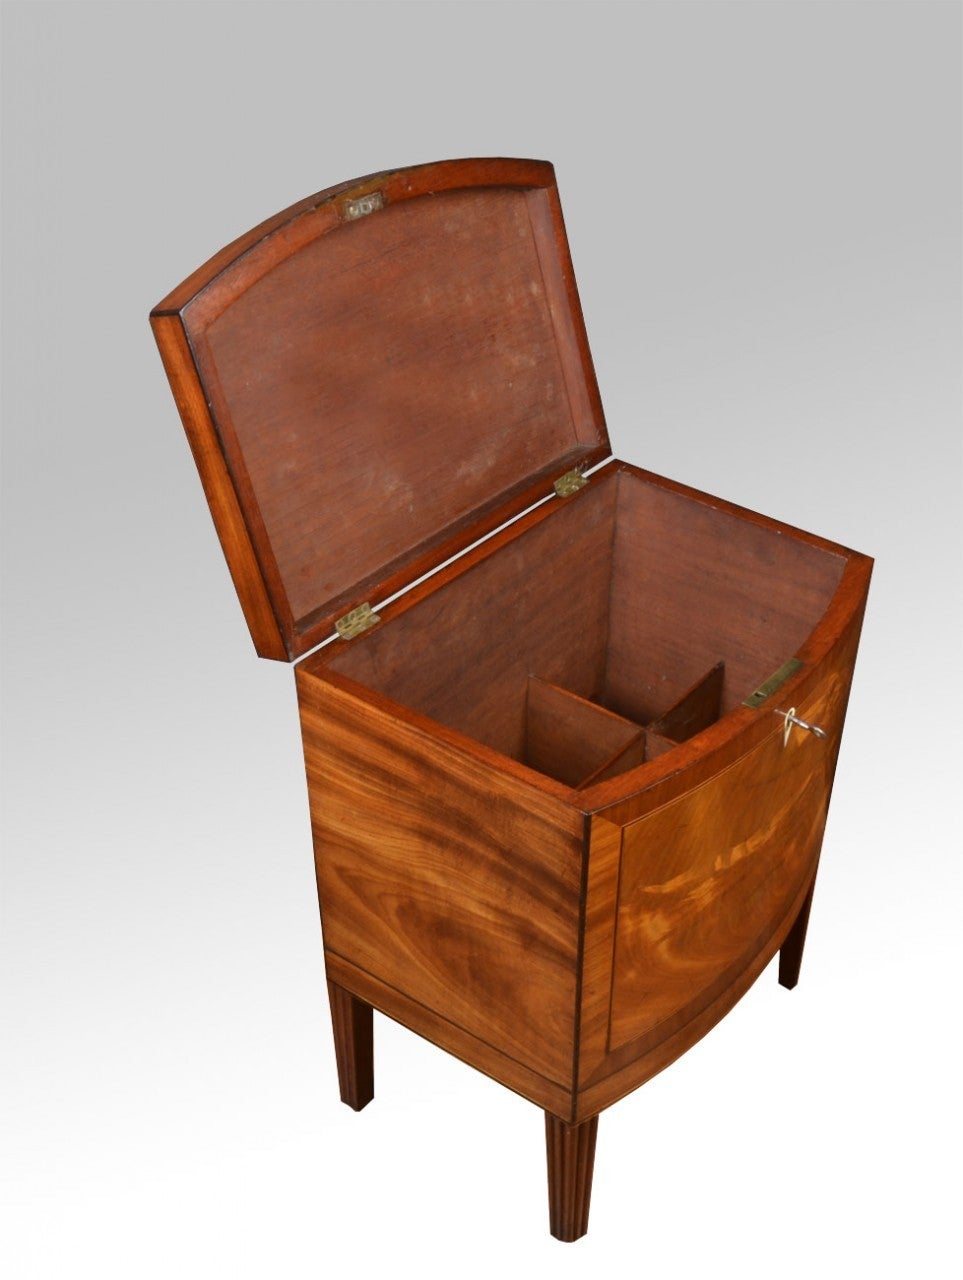 Georgian mahogany and ebony inlaid cellarette, with fitted interior, the top with moulded edge, on square reeded tapering legs

Dimensions:

Height 22.5 inches

Width 17 inches

Depth 12.5 inches.